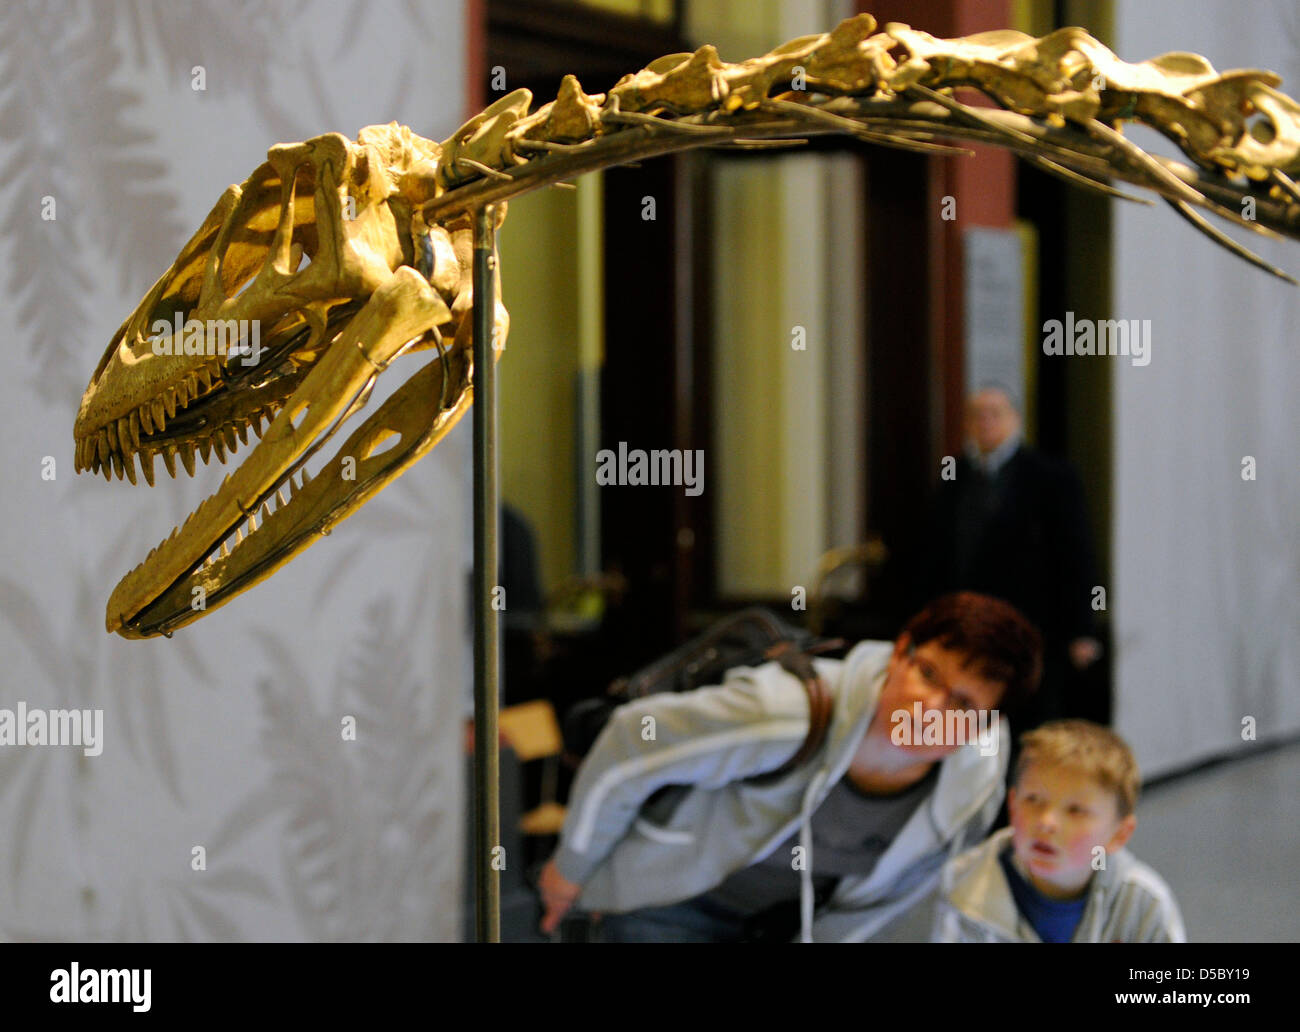 Visitors view the dinosaur's skeleton at the Museum ofNatural History in Berlin, Germany, dated 05 October 2009. With over 30 million collectors items and a public museum with 6,600 square meters, the Museum of Natural History is one of the five biggest worldwide. The museum's collections, which are outside of the exhibition area, contain precious objects of mineralogy, zoology and Stock Photo